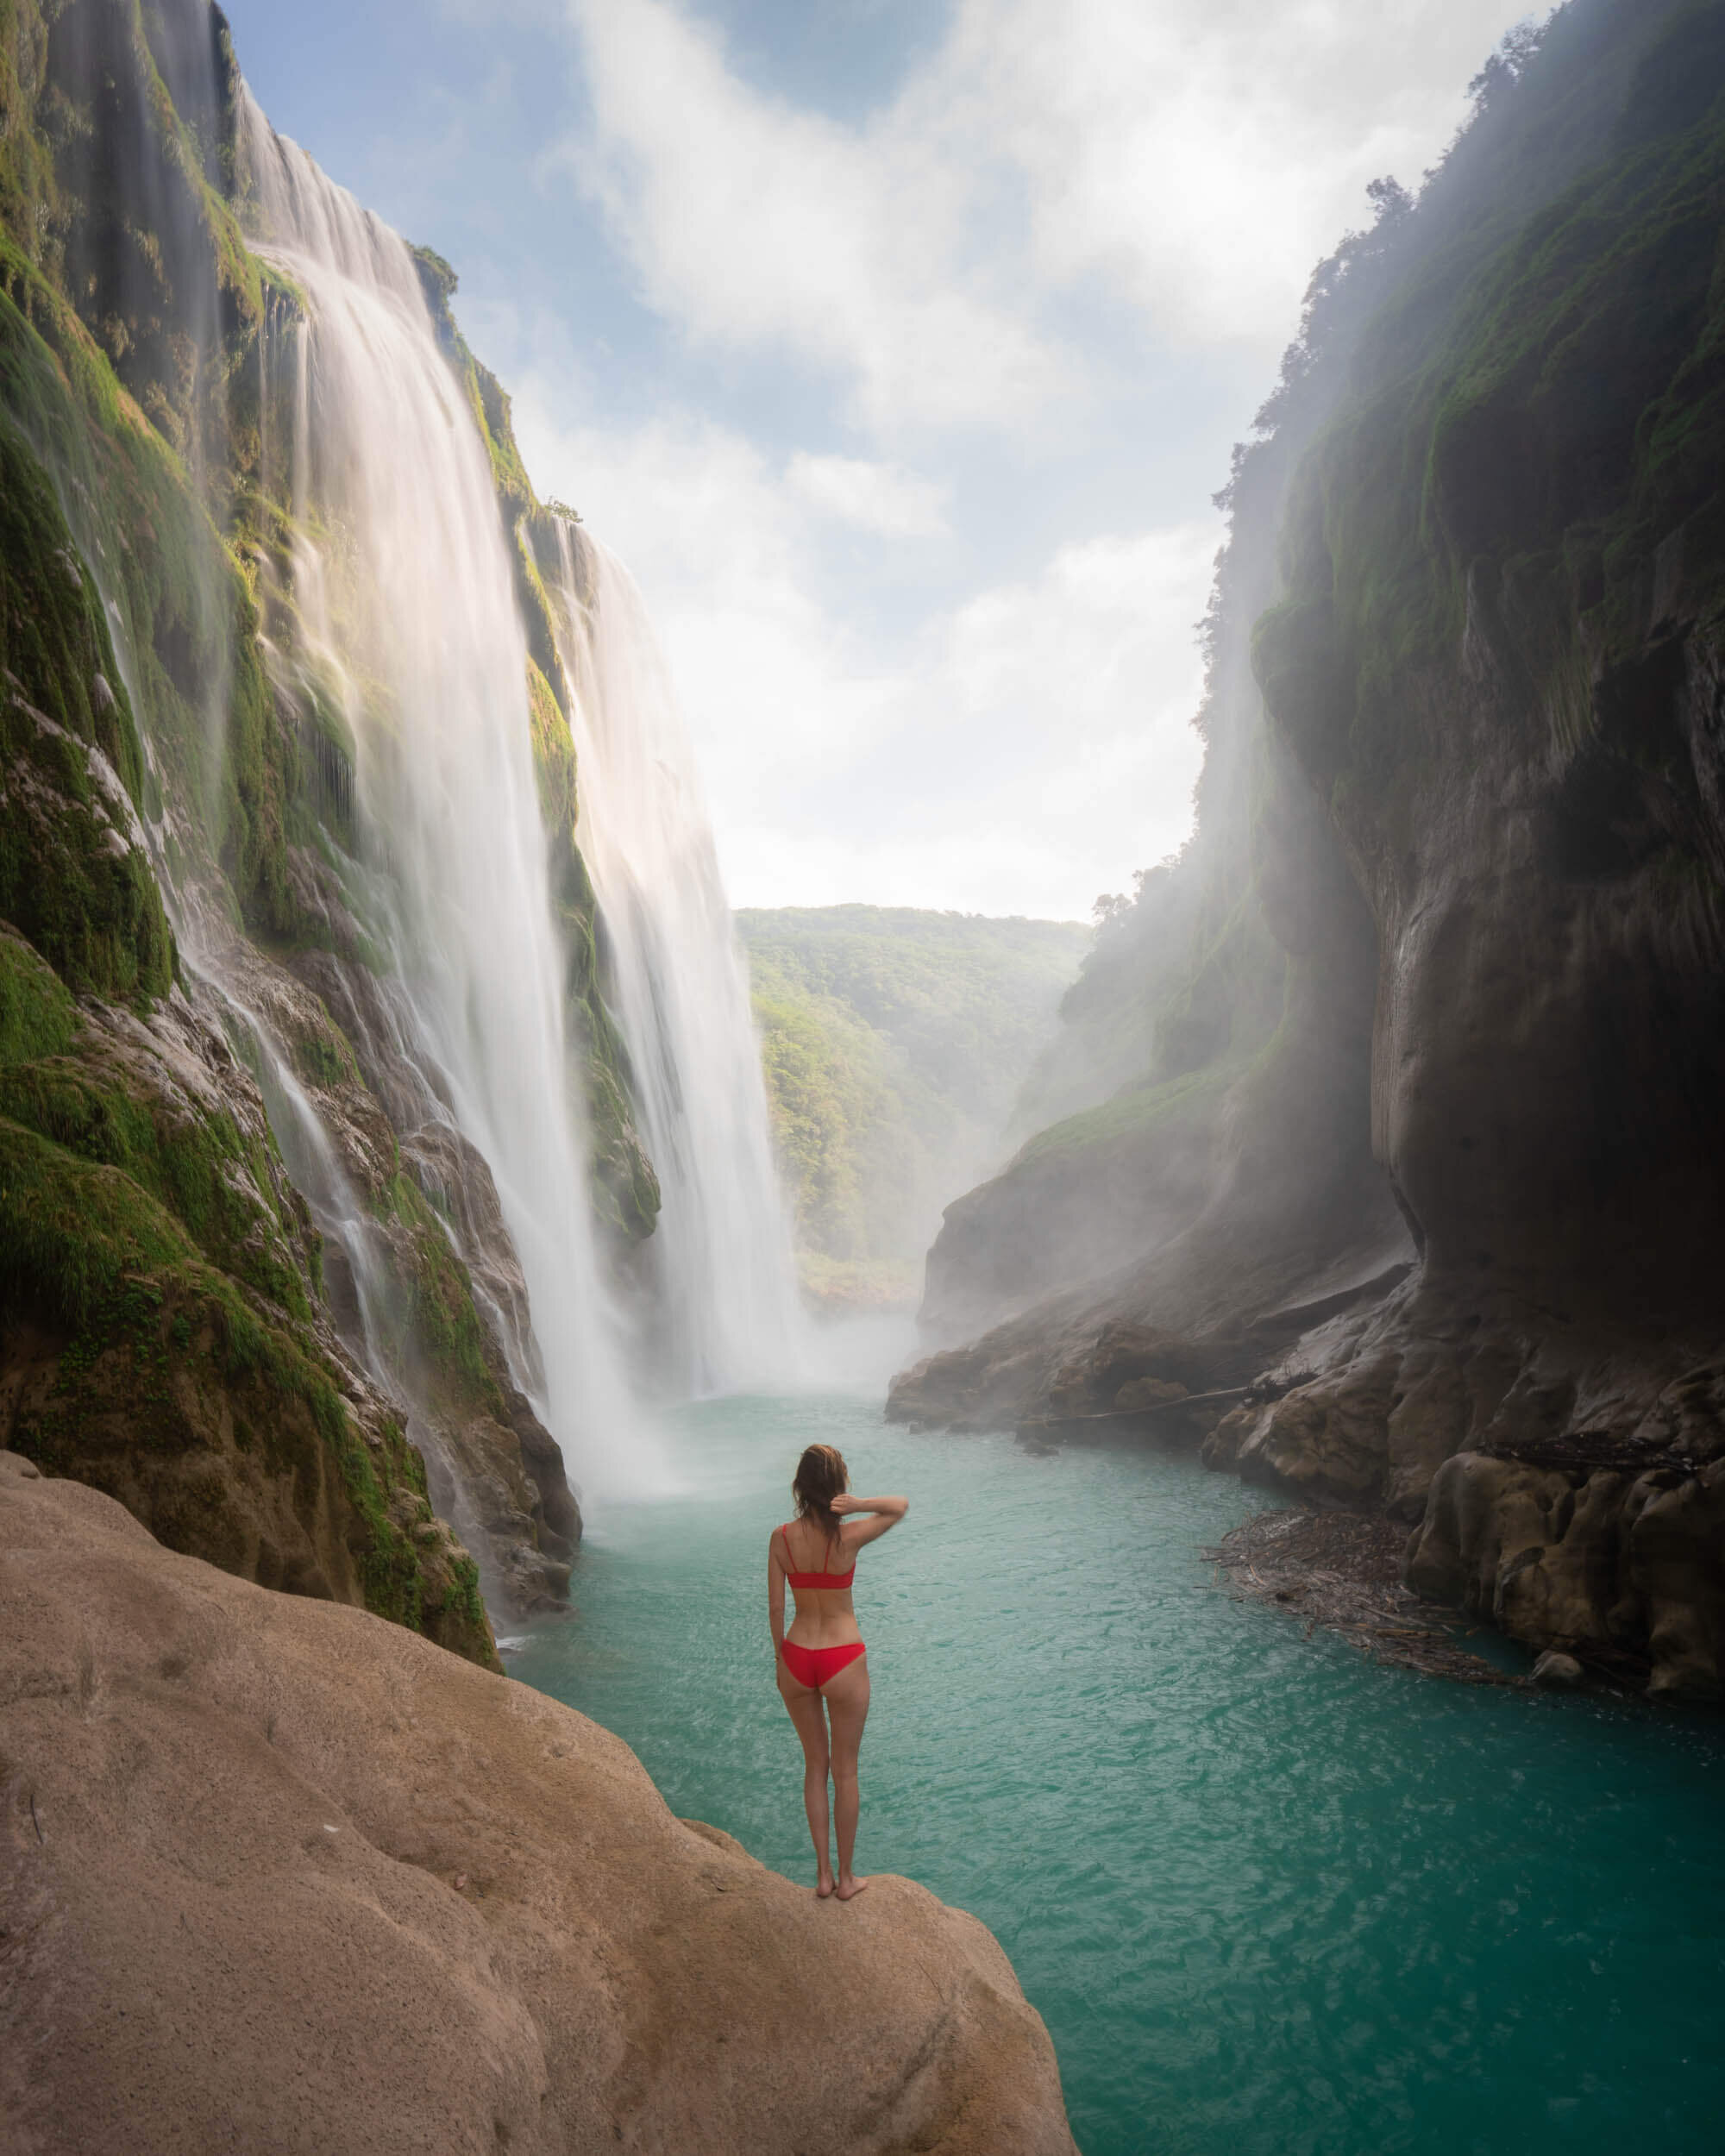 There is a trail that will take you down to the base of Tamul Waterfall in Mexico’s La Huasteca Potosina region.